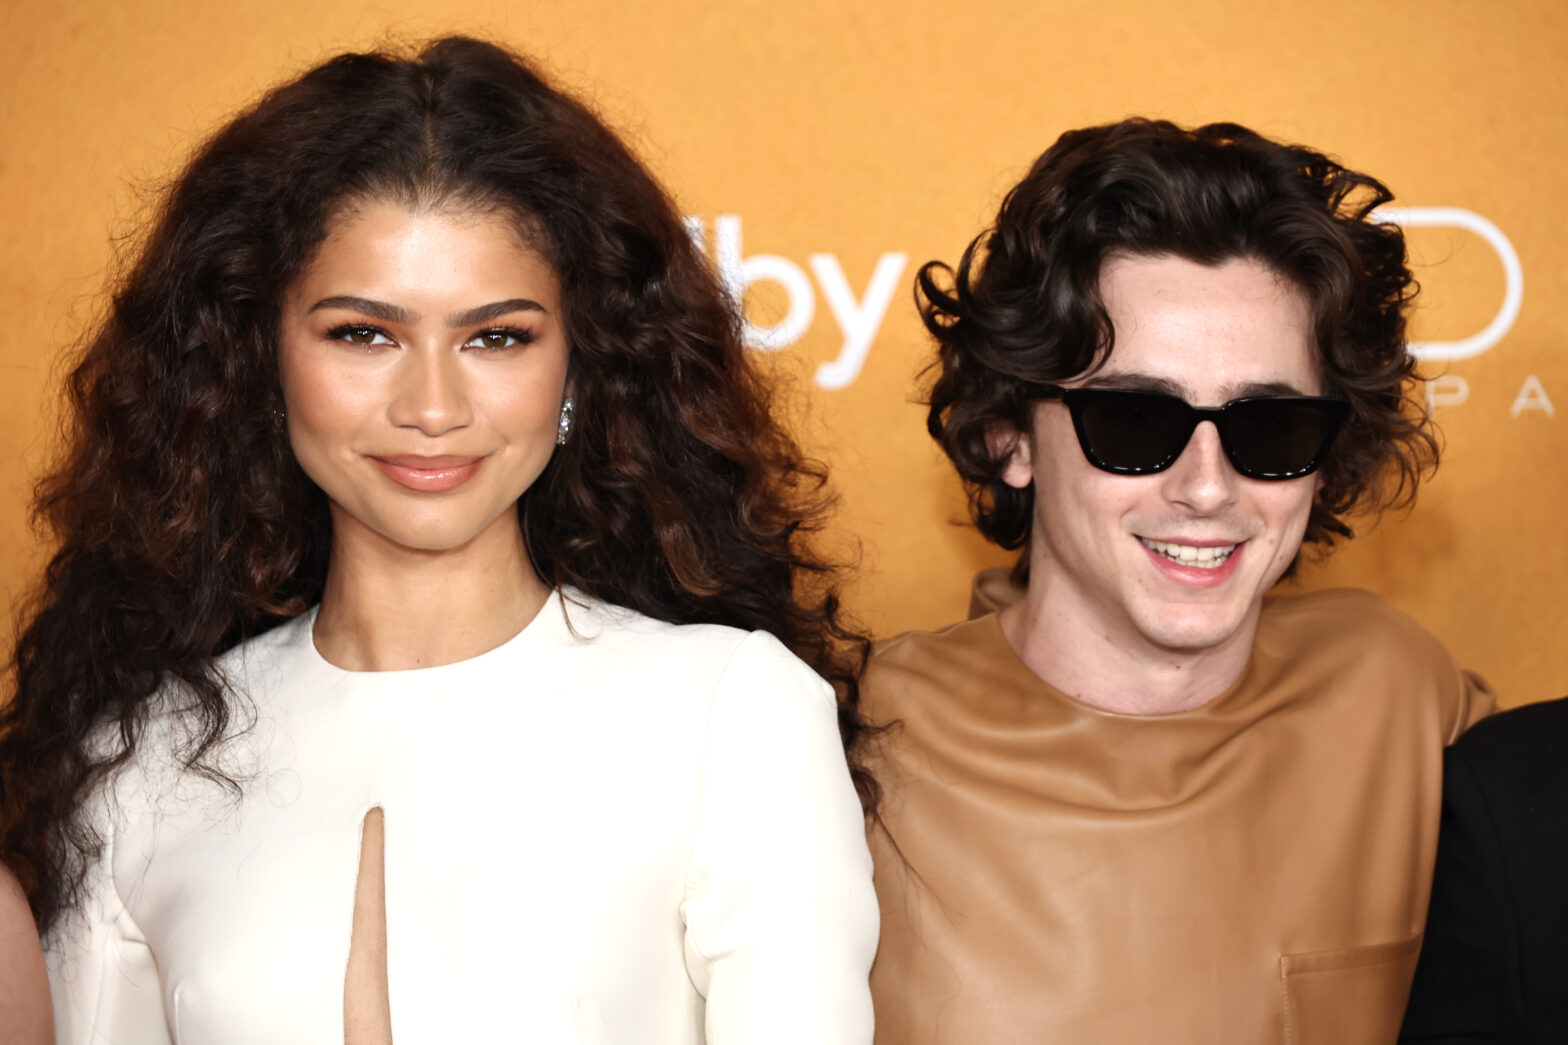 dune two premiere. pictured: zendaya and timothee chalamet